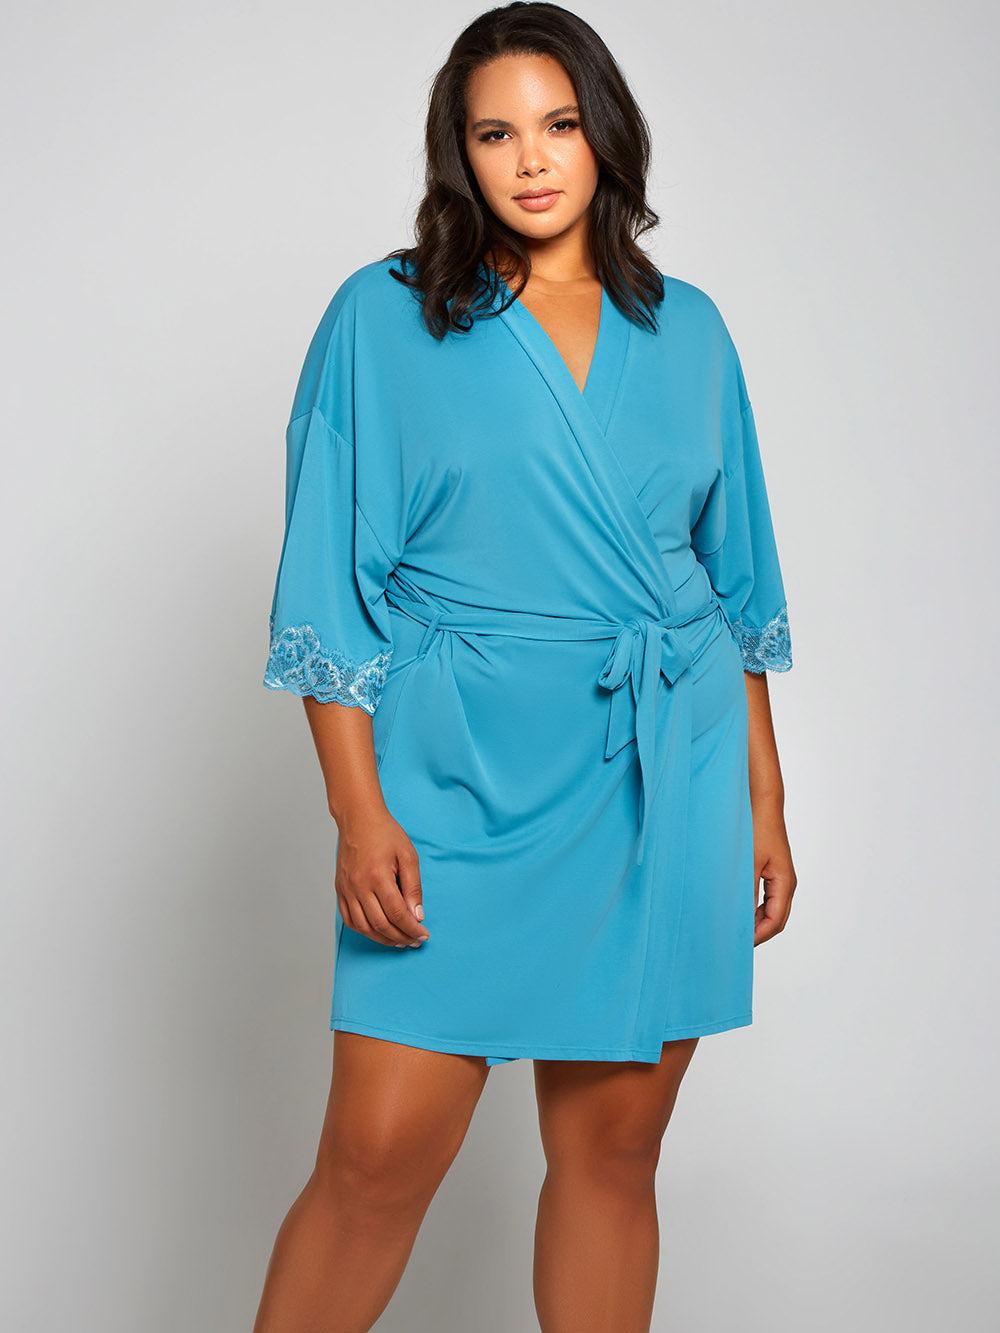 iCollection Nala Plus Size Robe in Blue | Lyst